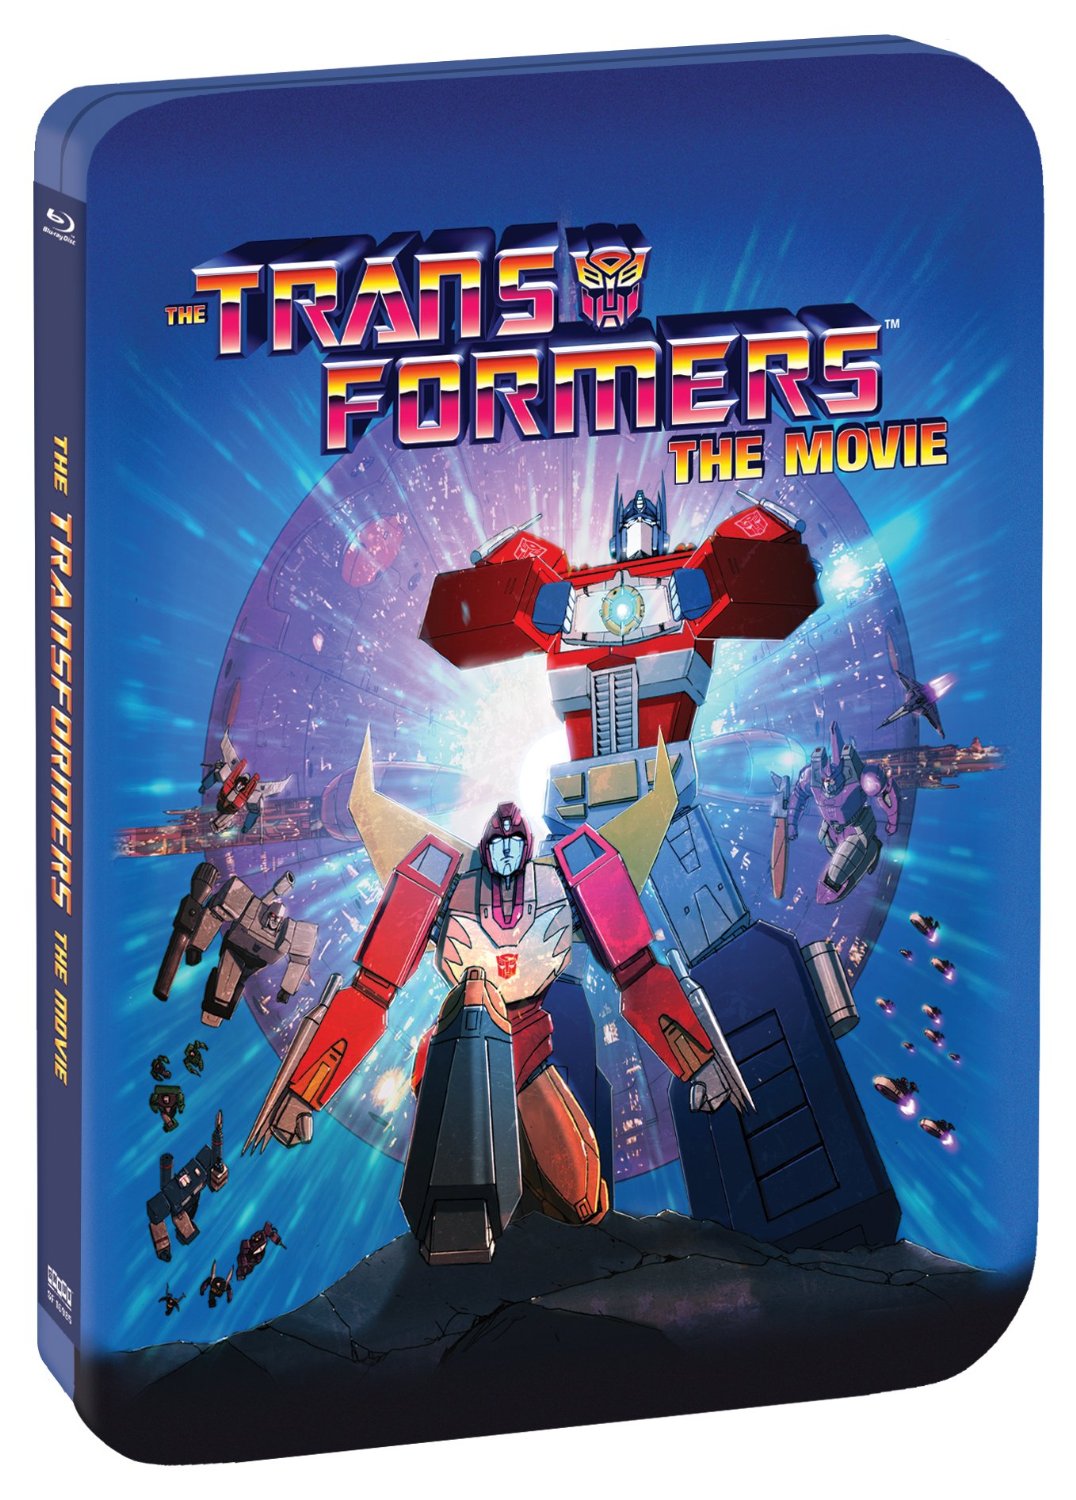 Limited Edition 30th Anniversary Blu-Ray Steelbook of Transformers